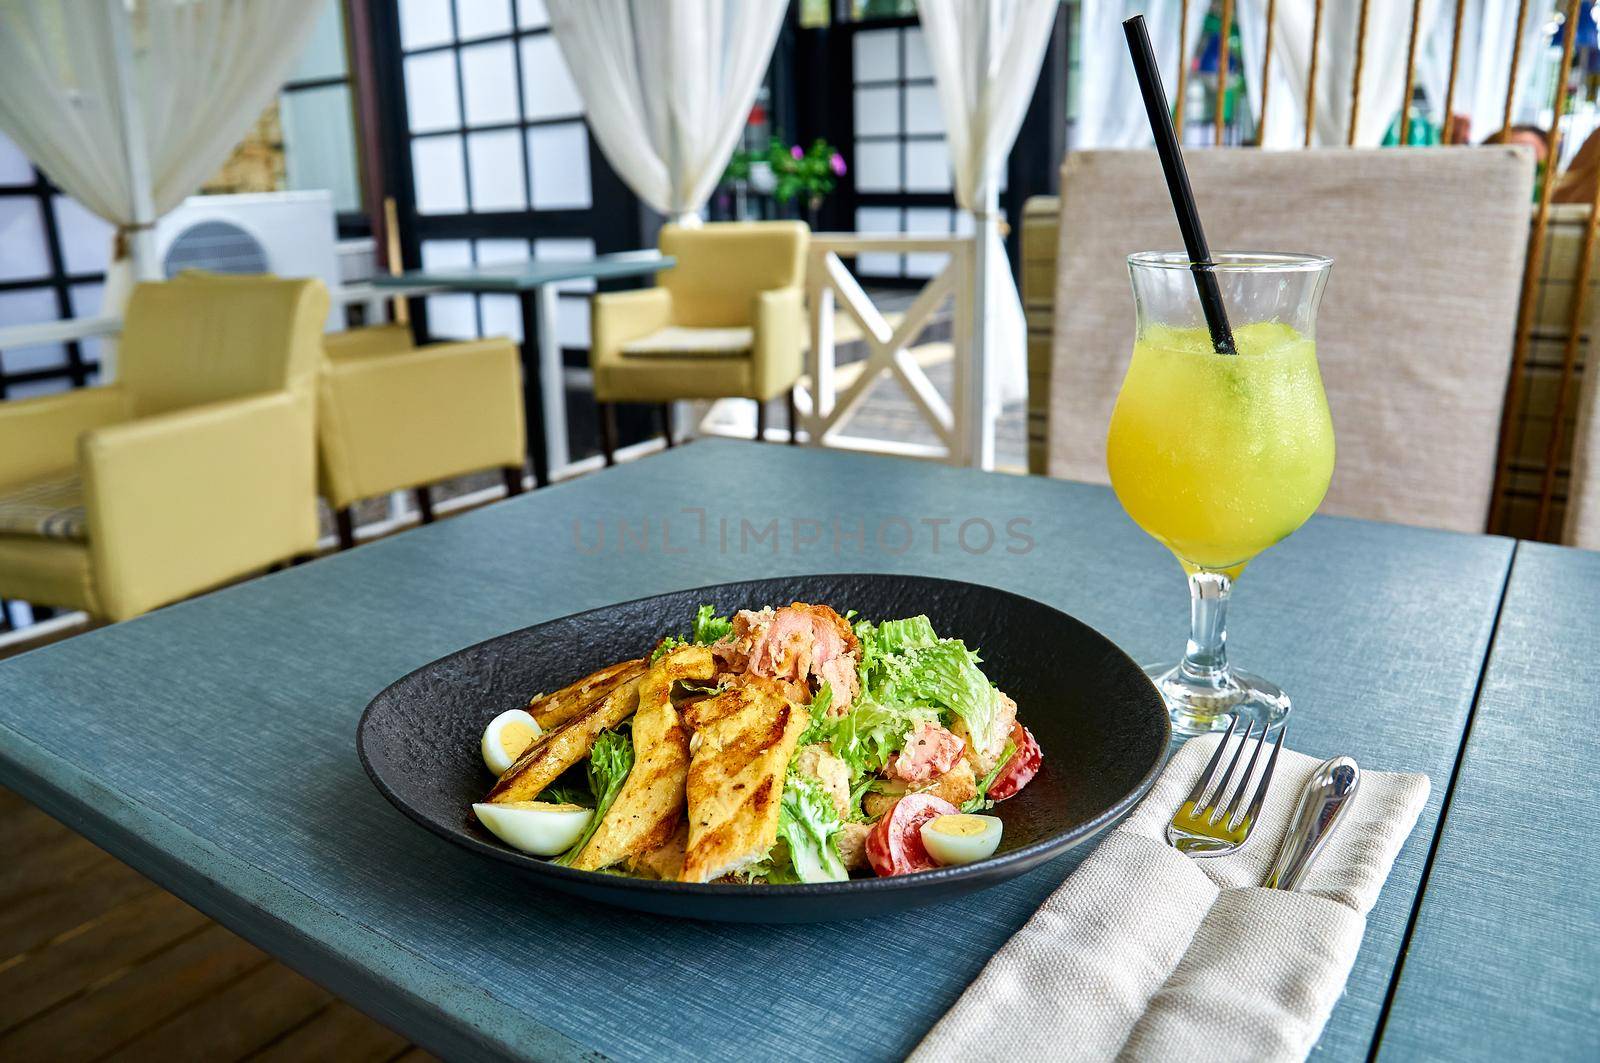 Fresh Caesar salad with chicken in a black bowl on the veranda of the restaurant.